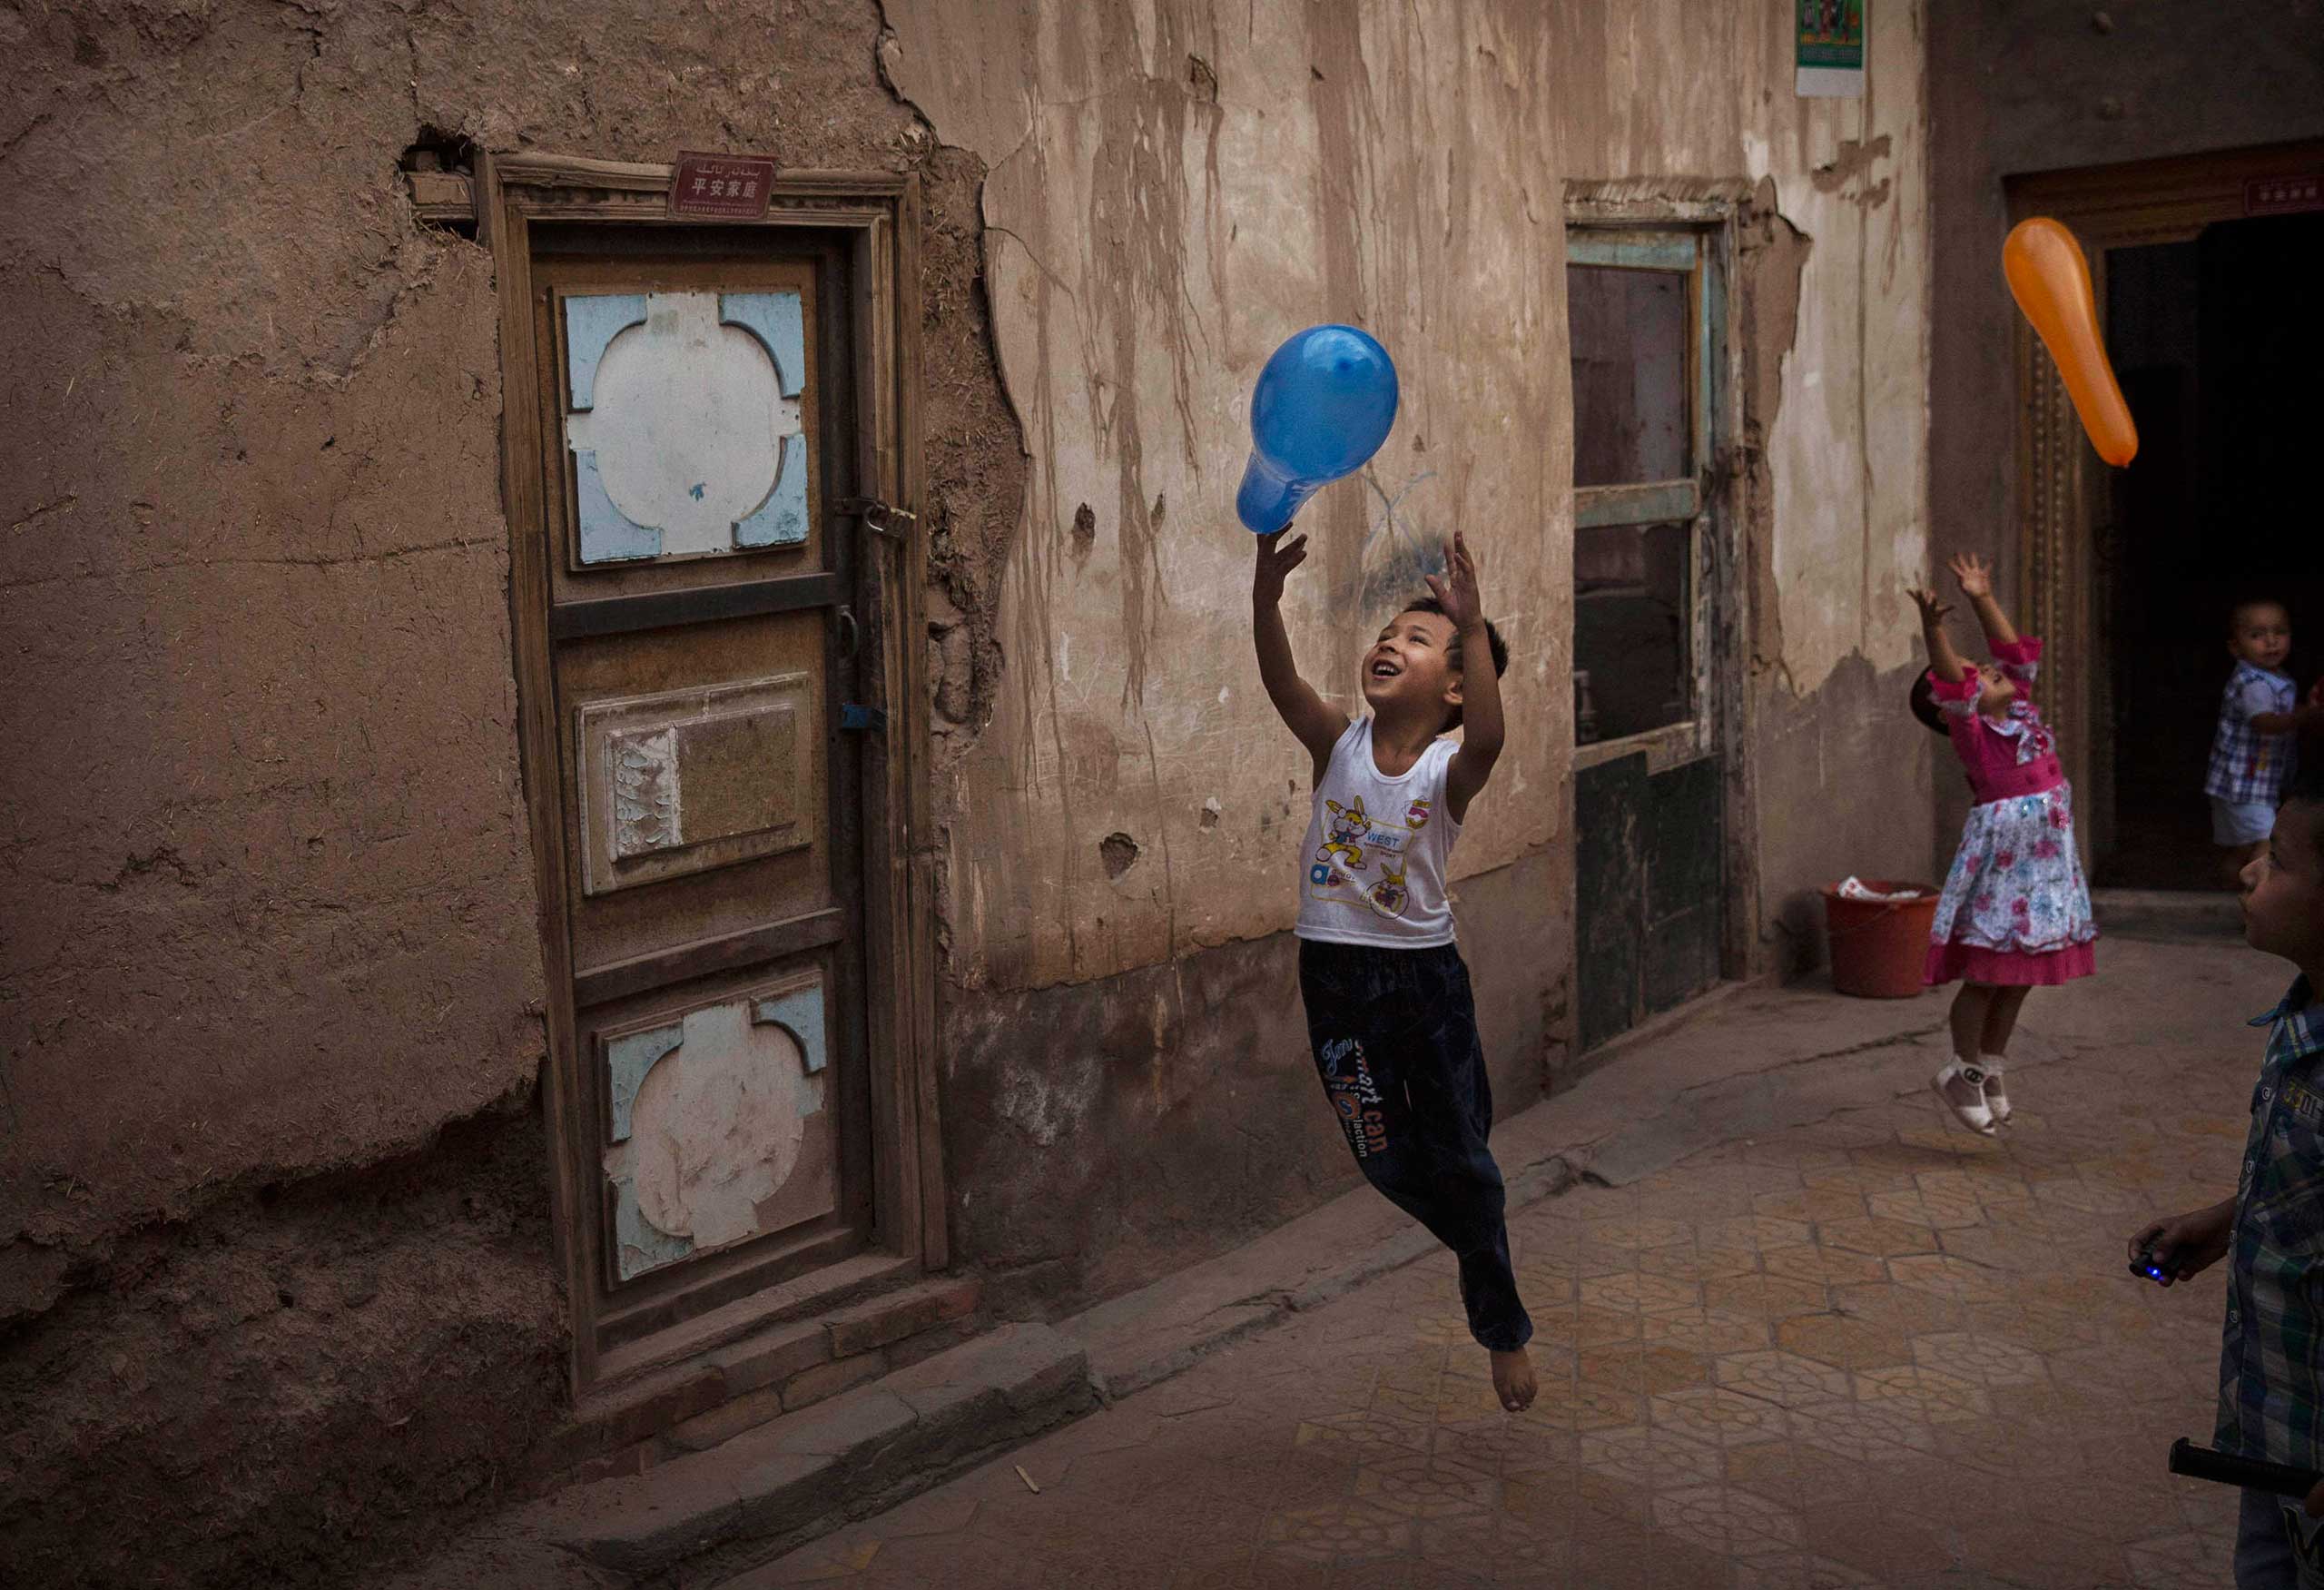 Uighur children play with balloons on the Eid holiday in alleyway in old Kashgar, Xinjiang Province, China, July 29, 2014.